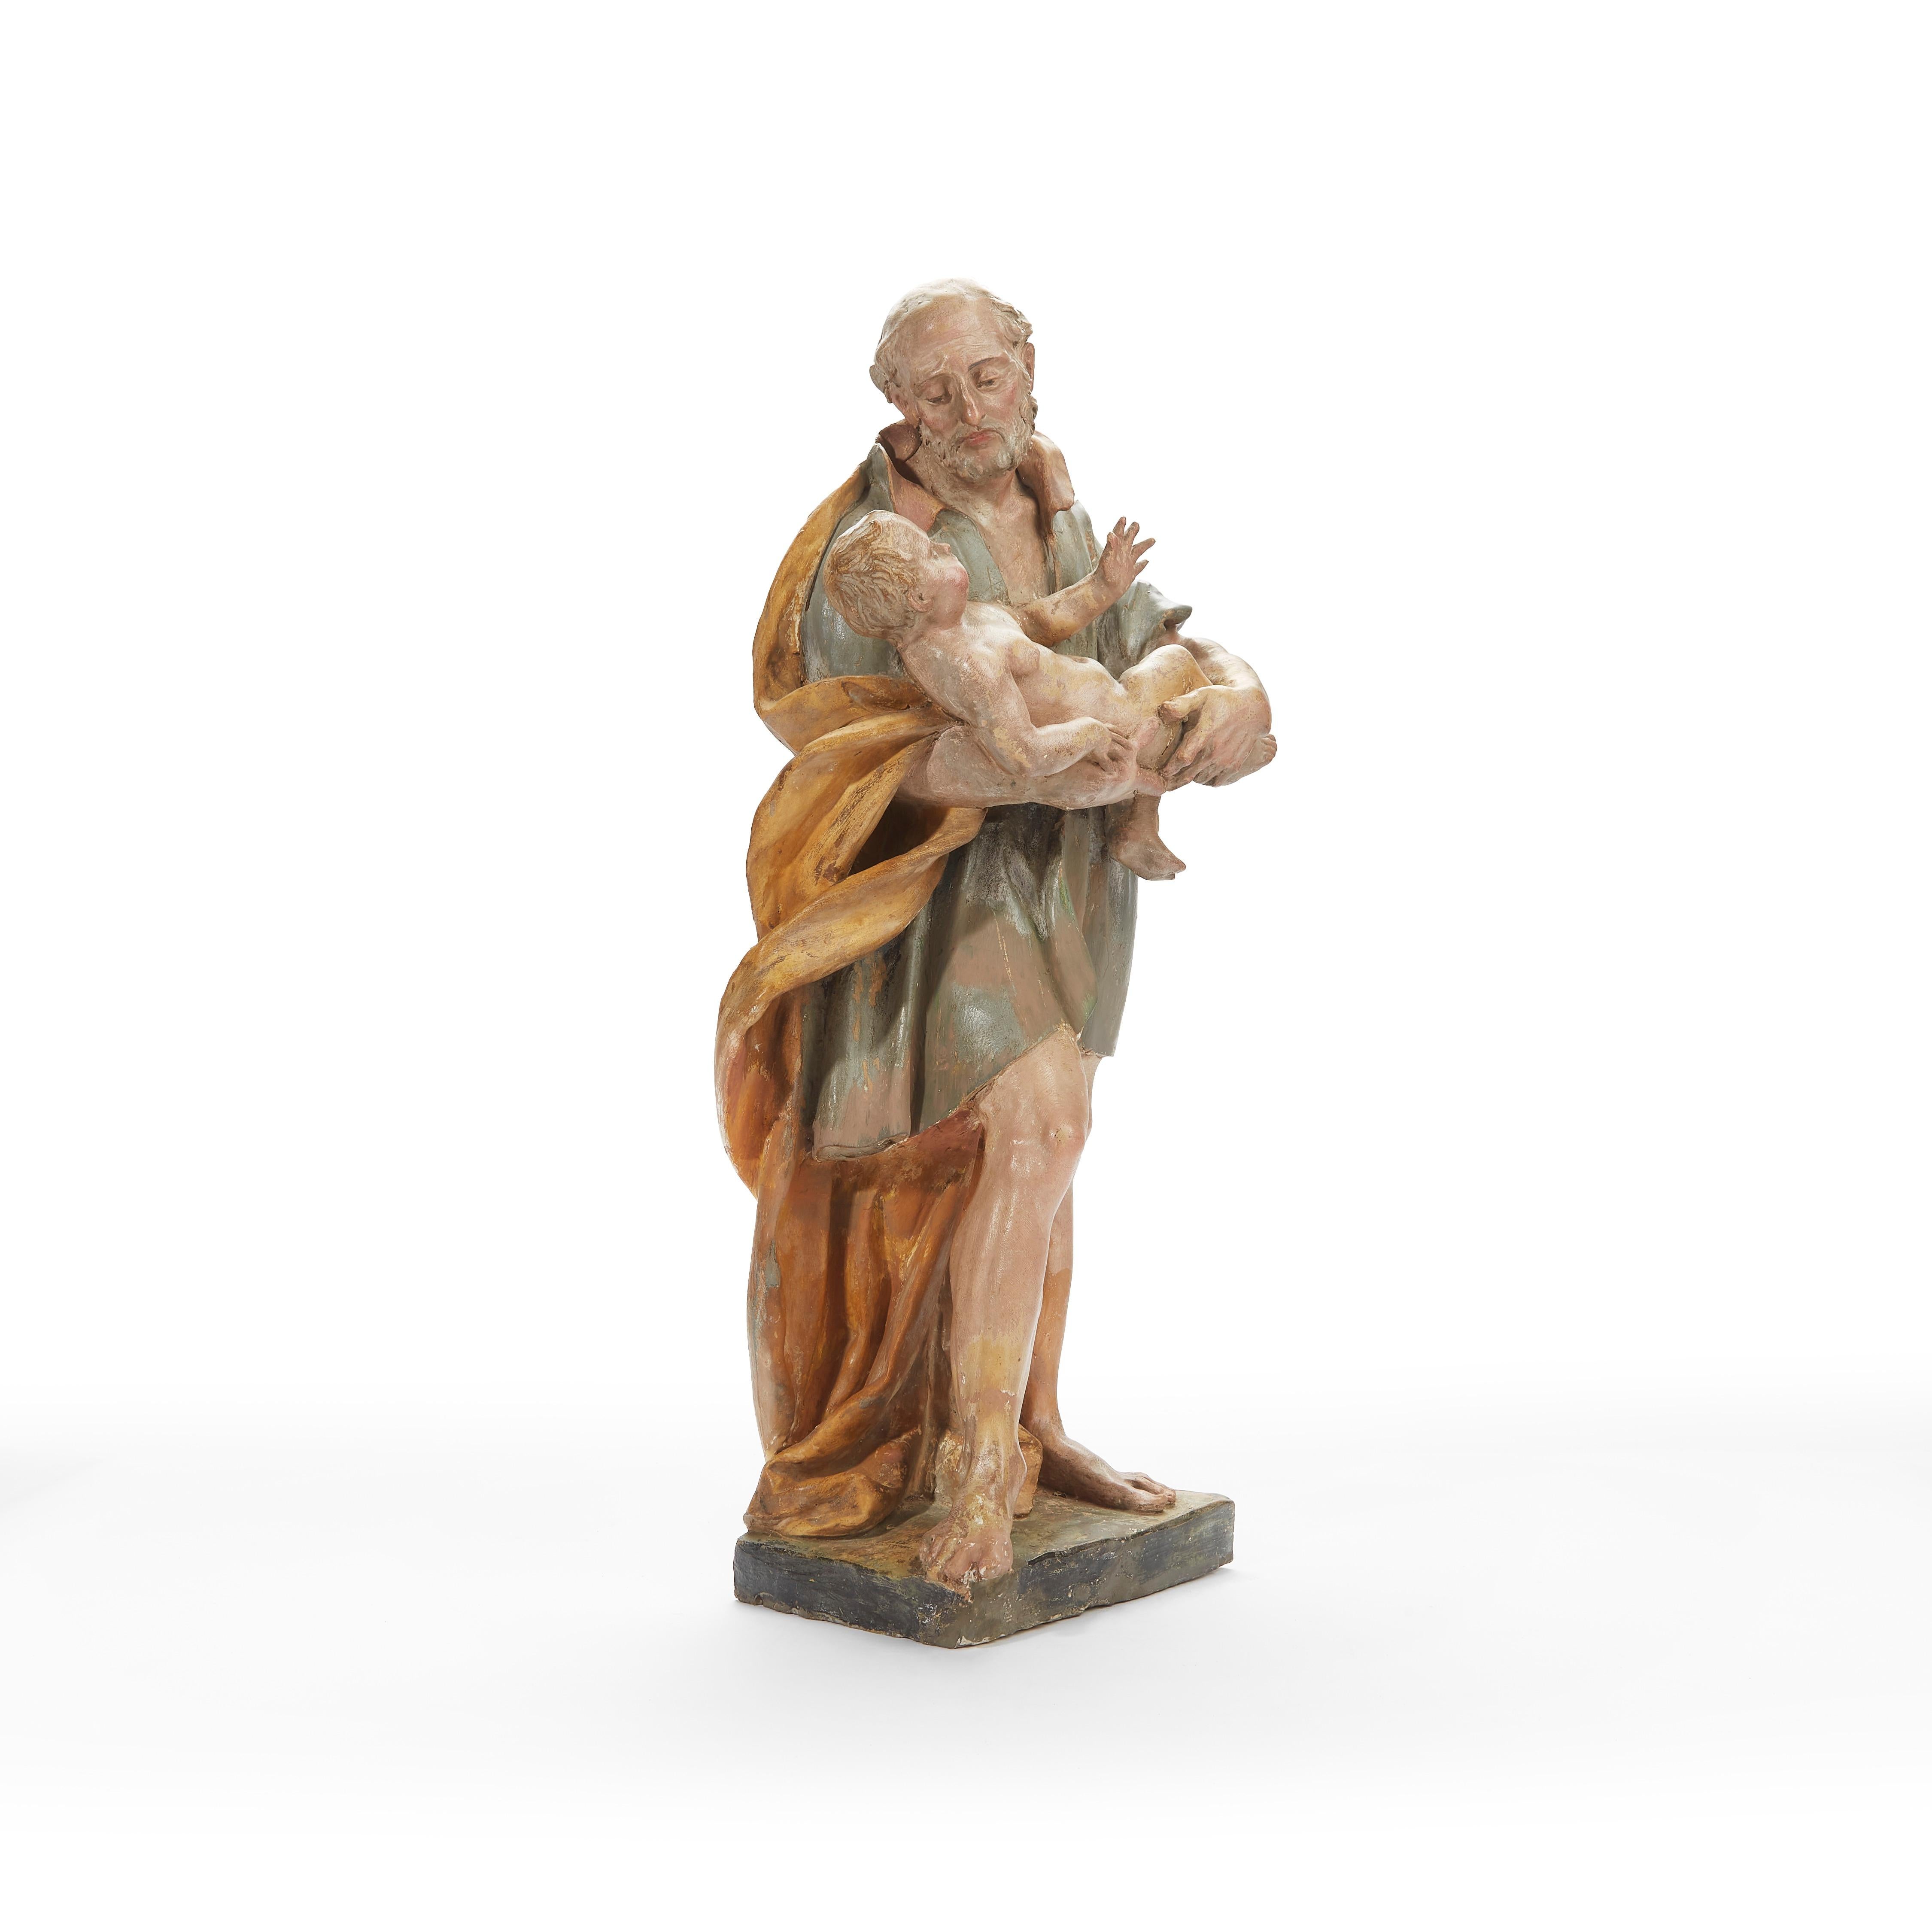 From Italy a superlative Bolognese Baroque polychrome earthenware Saint Joseph with Infant Jesus sculpture, circle of old master Angelo Gabriello Piò, Bologna 1690-1770, dating back to the first quarter of 18th century in good age related condition,